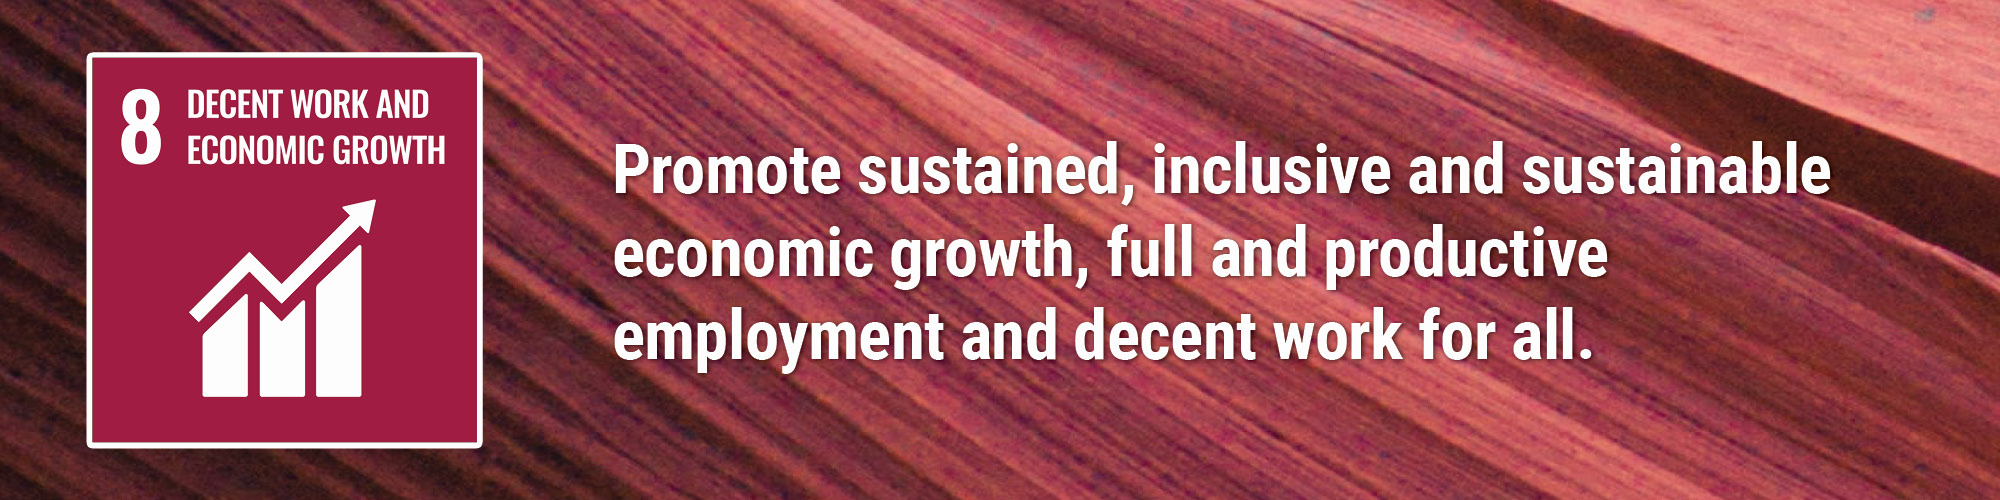 Promote sustained, inclusive and sustainable economic growth, full and productive employment and decent work for all.